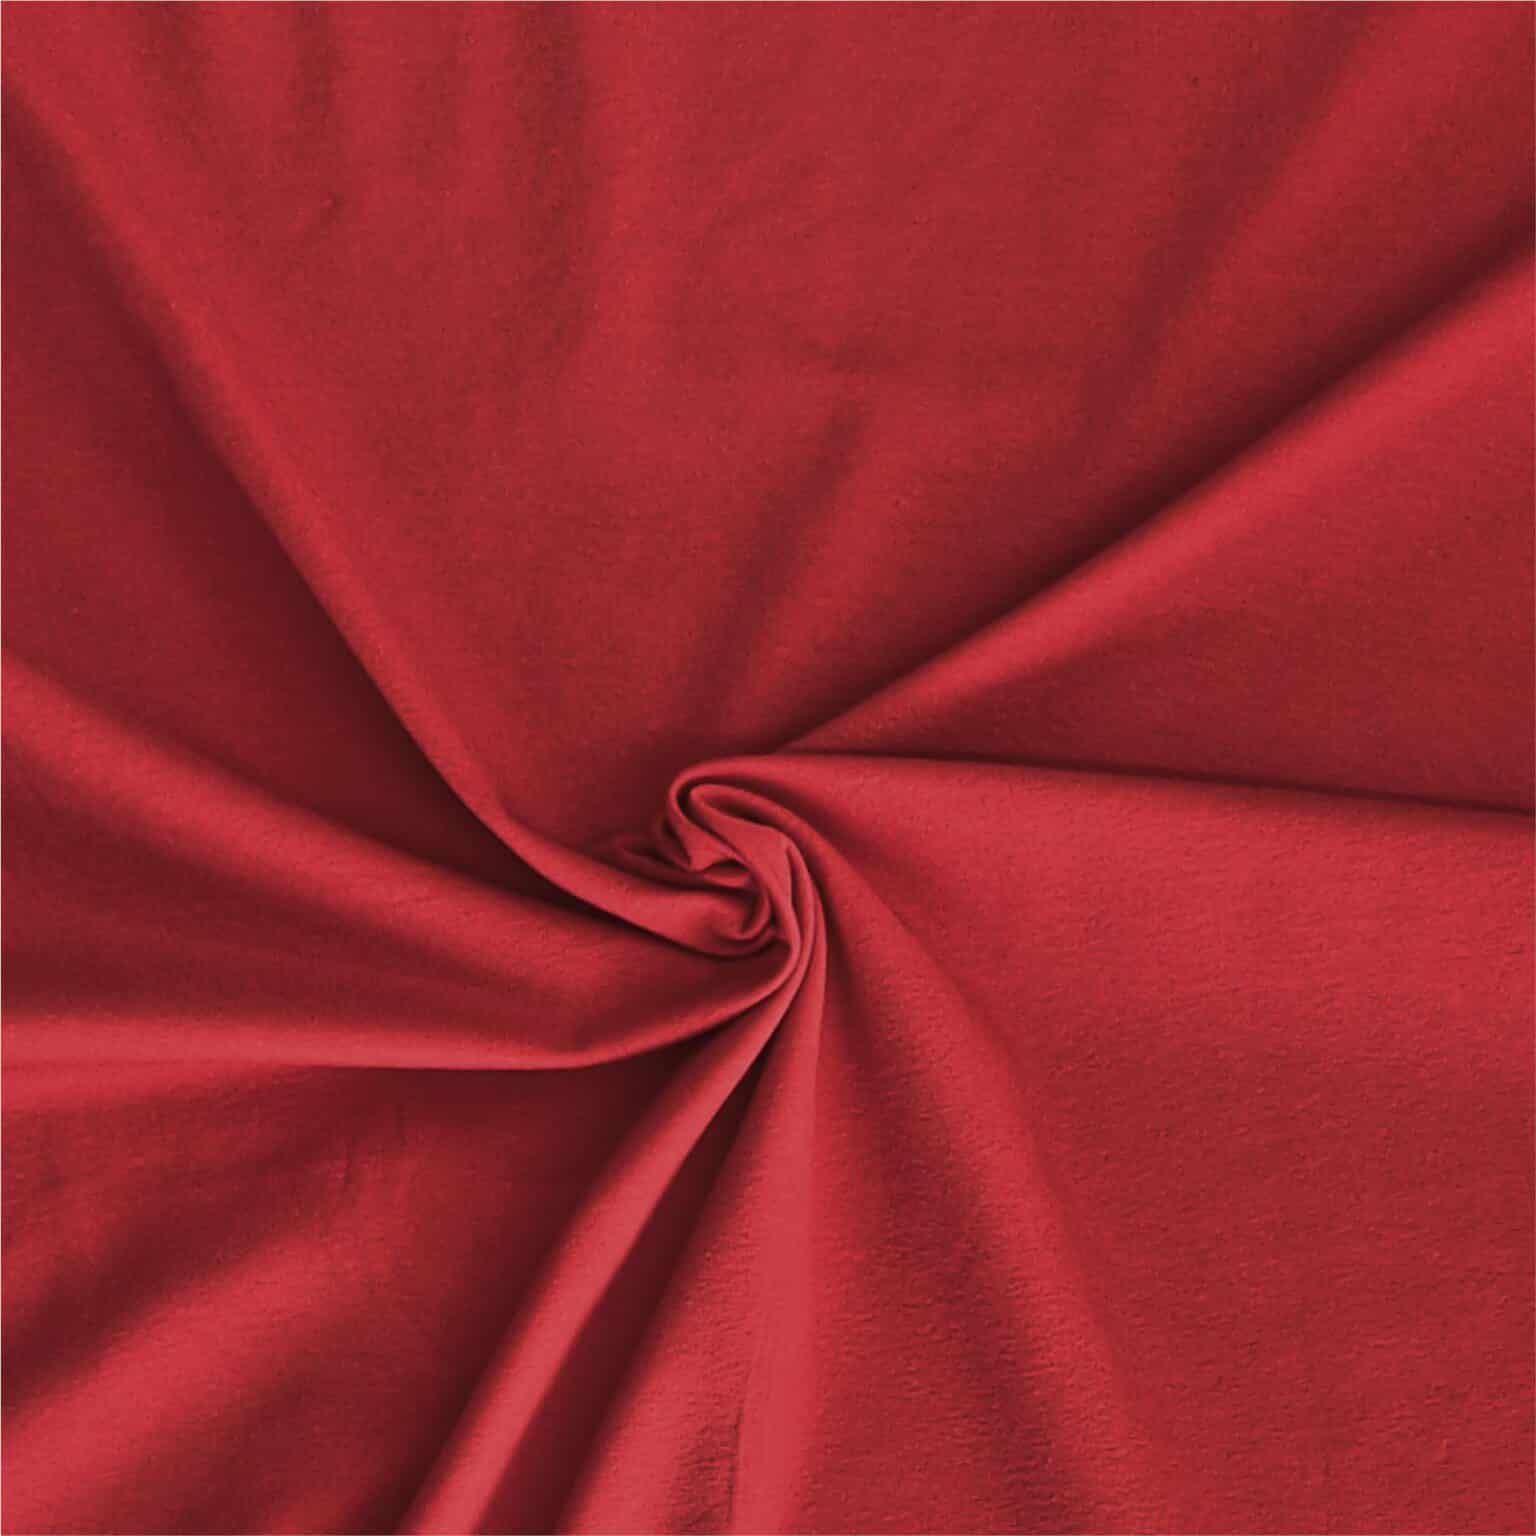 red cotton plain jersey fabric | More Sewing